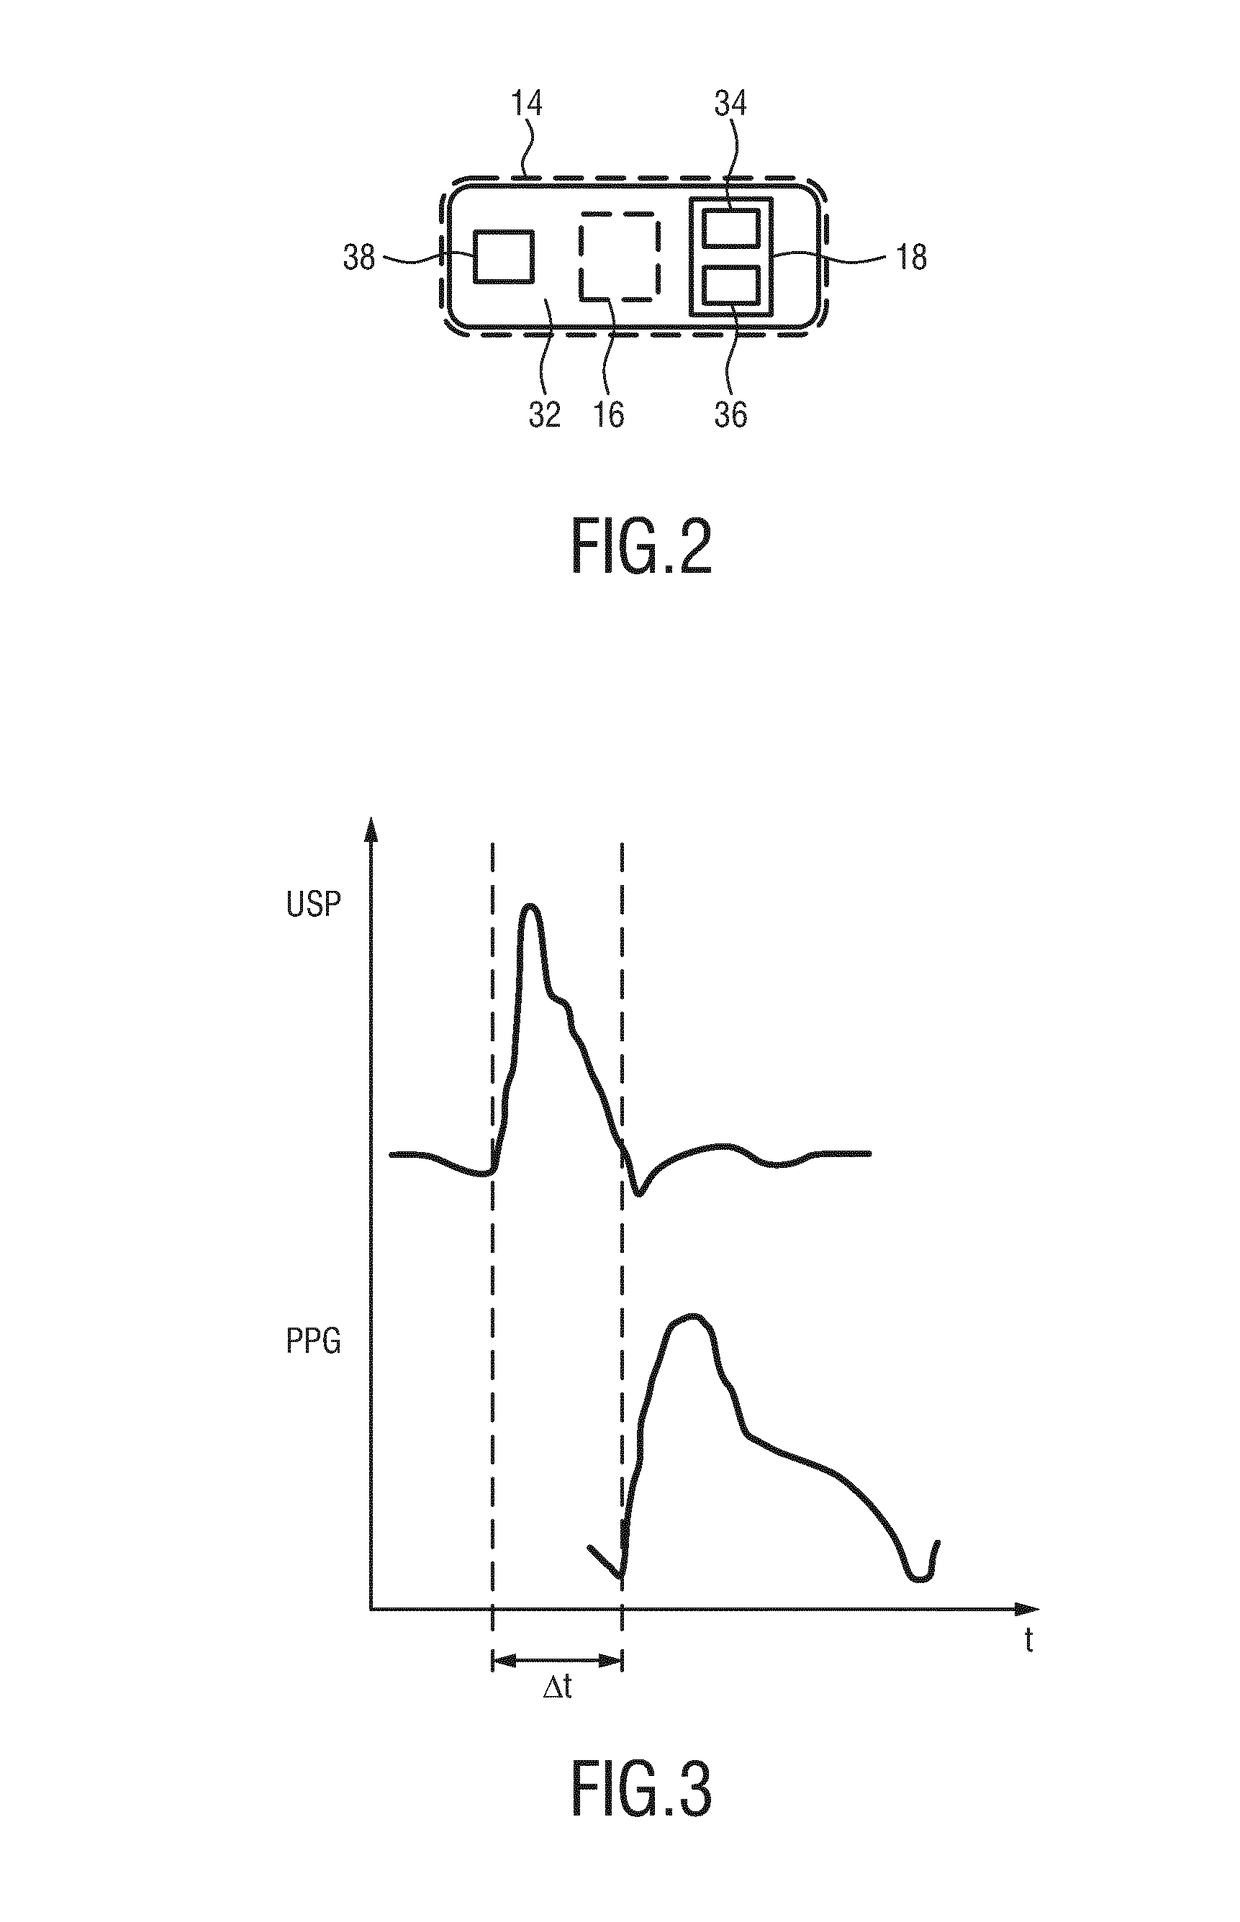 Monitoring apparatus for monitoring blood pressure of a subject